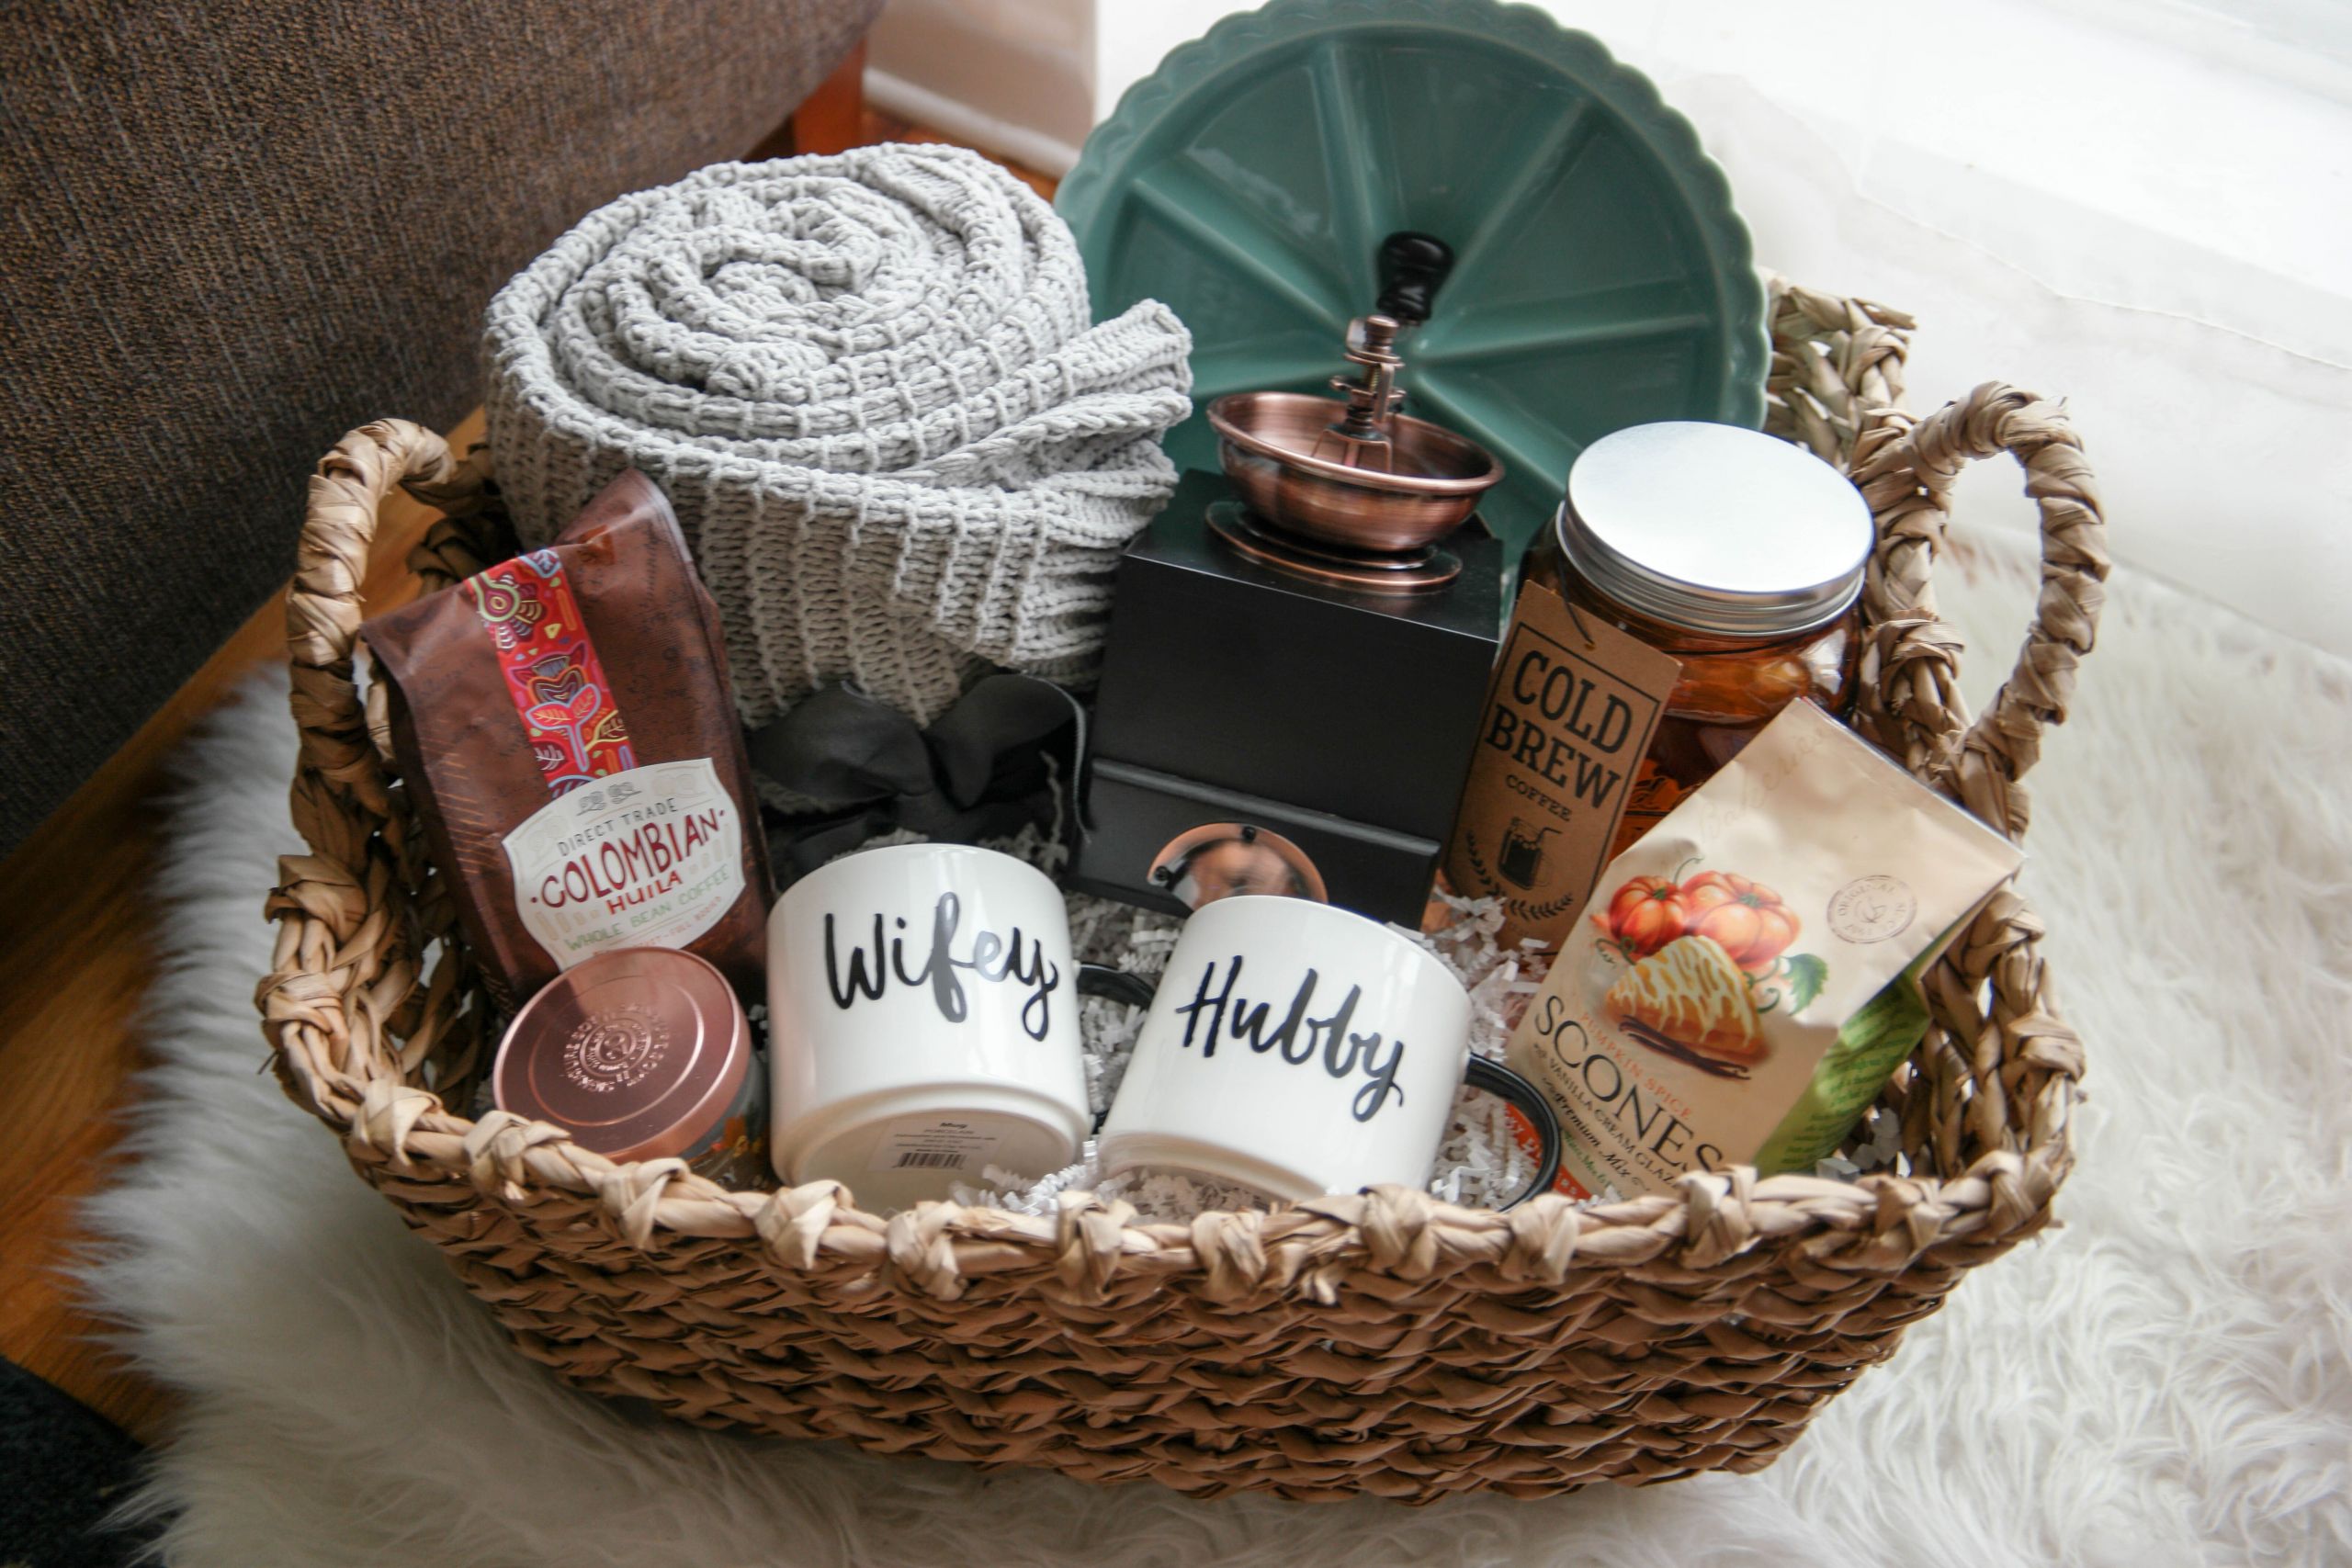 New Couples Gift Ideas
 A Cozy Morning Gift Basket A Perfect Gift For Newlyweds